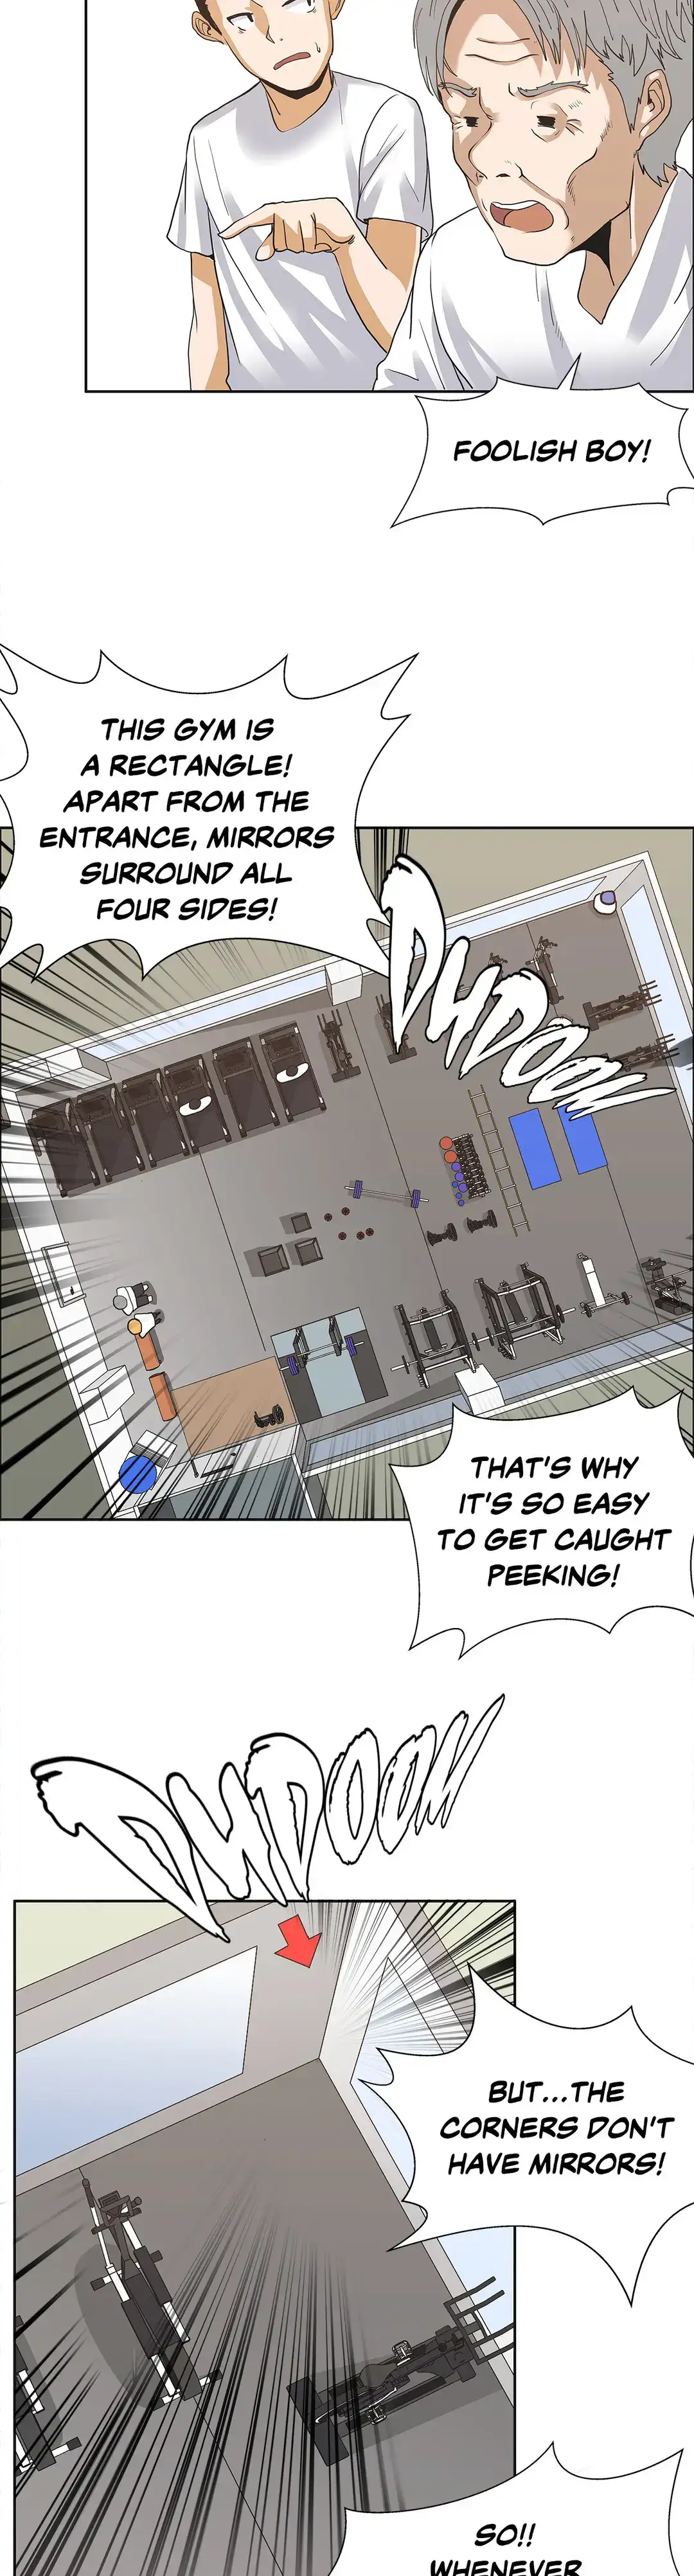 The Girl That Wet the Wall - Chapter 6 Page 25